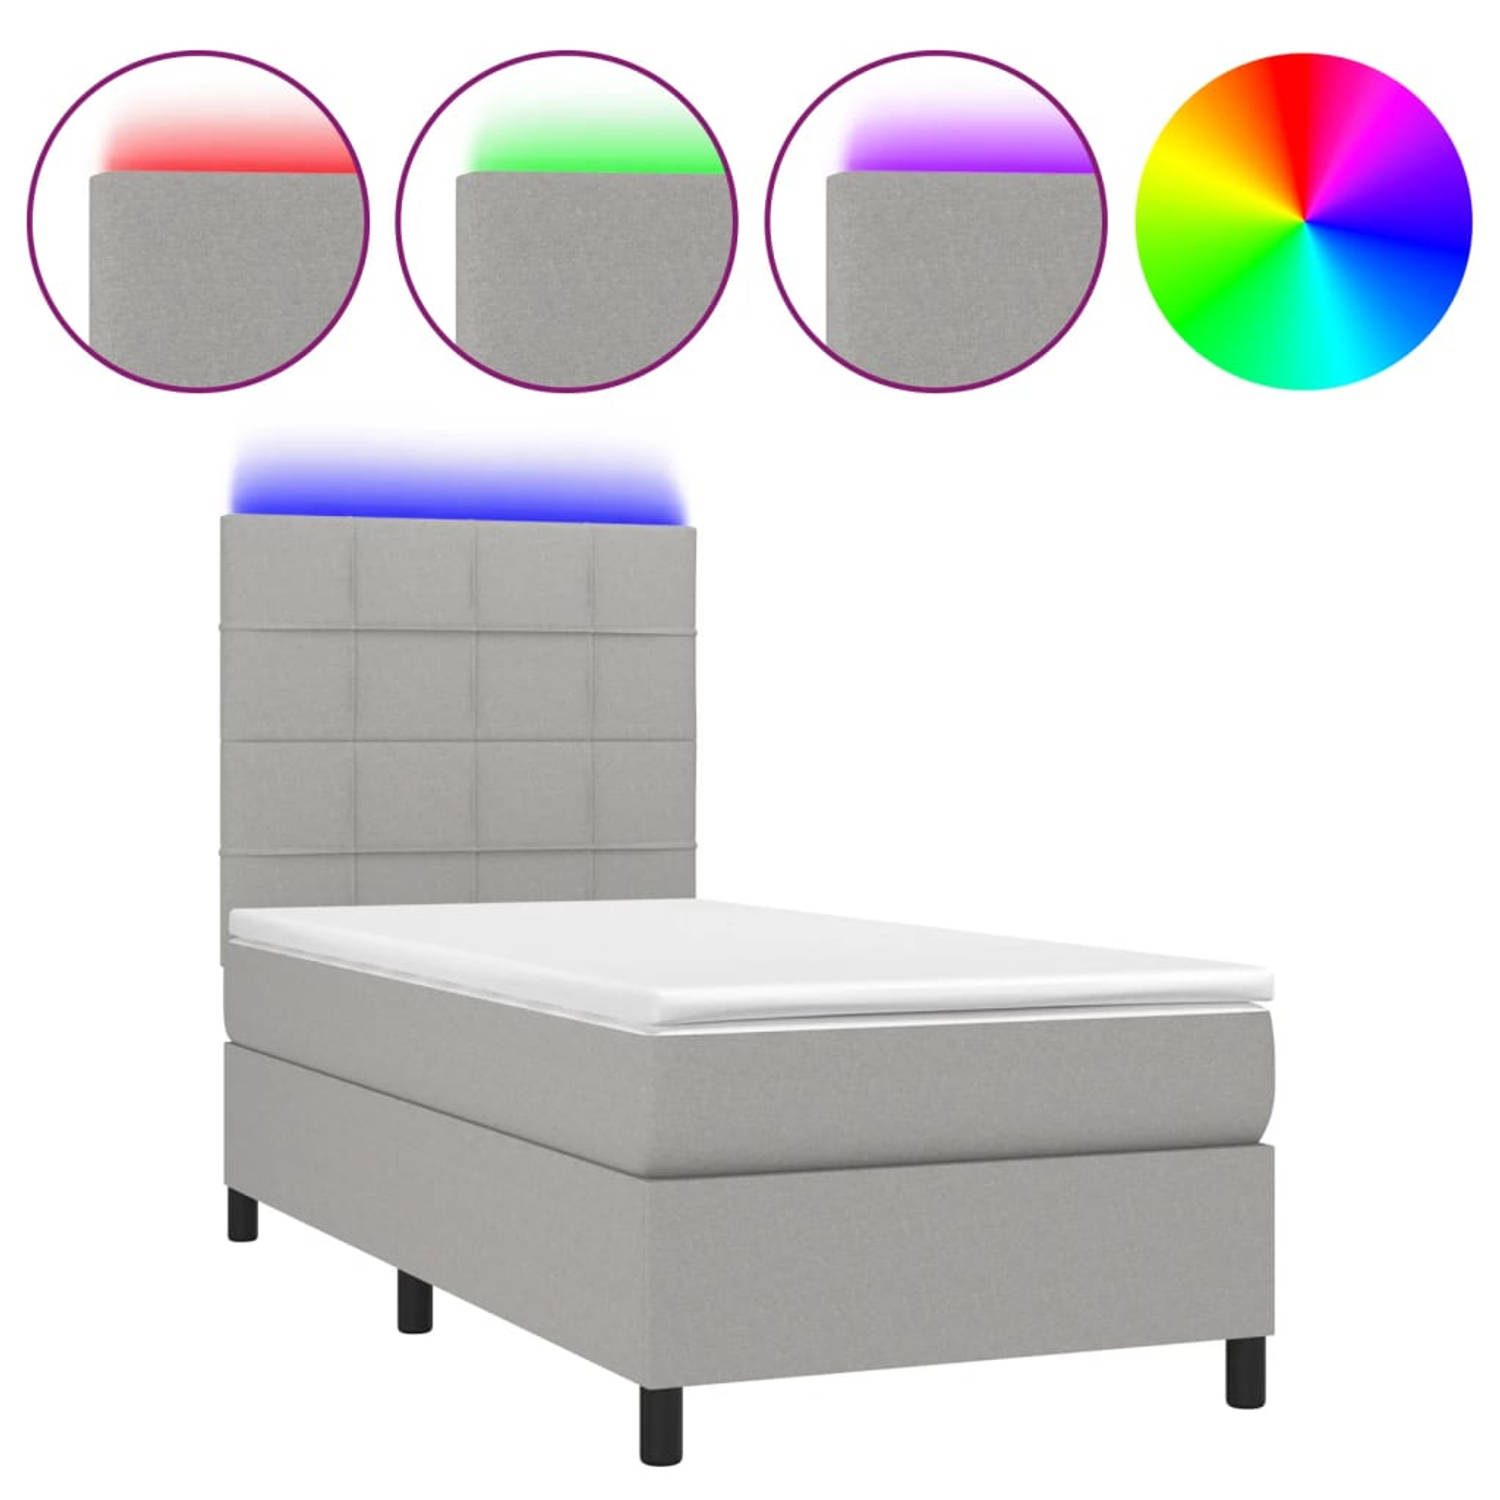 The Living Store Bed LED-light - 203 x 100 cm - Light Grey - Breathable and Durable - Adjustable Headboard - Colorful LED Lighting - Pocket Spring Mattress - Skin-friendly Top Matt